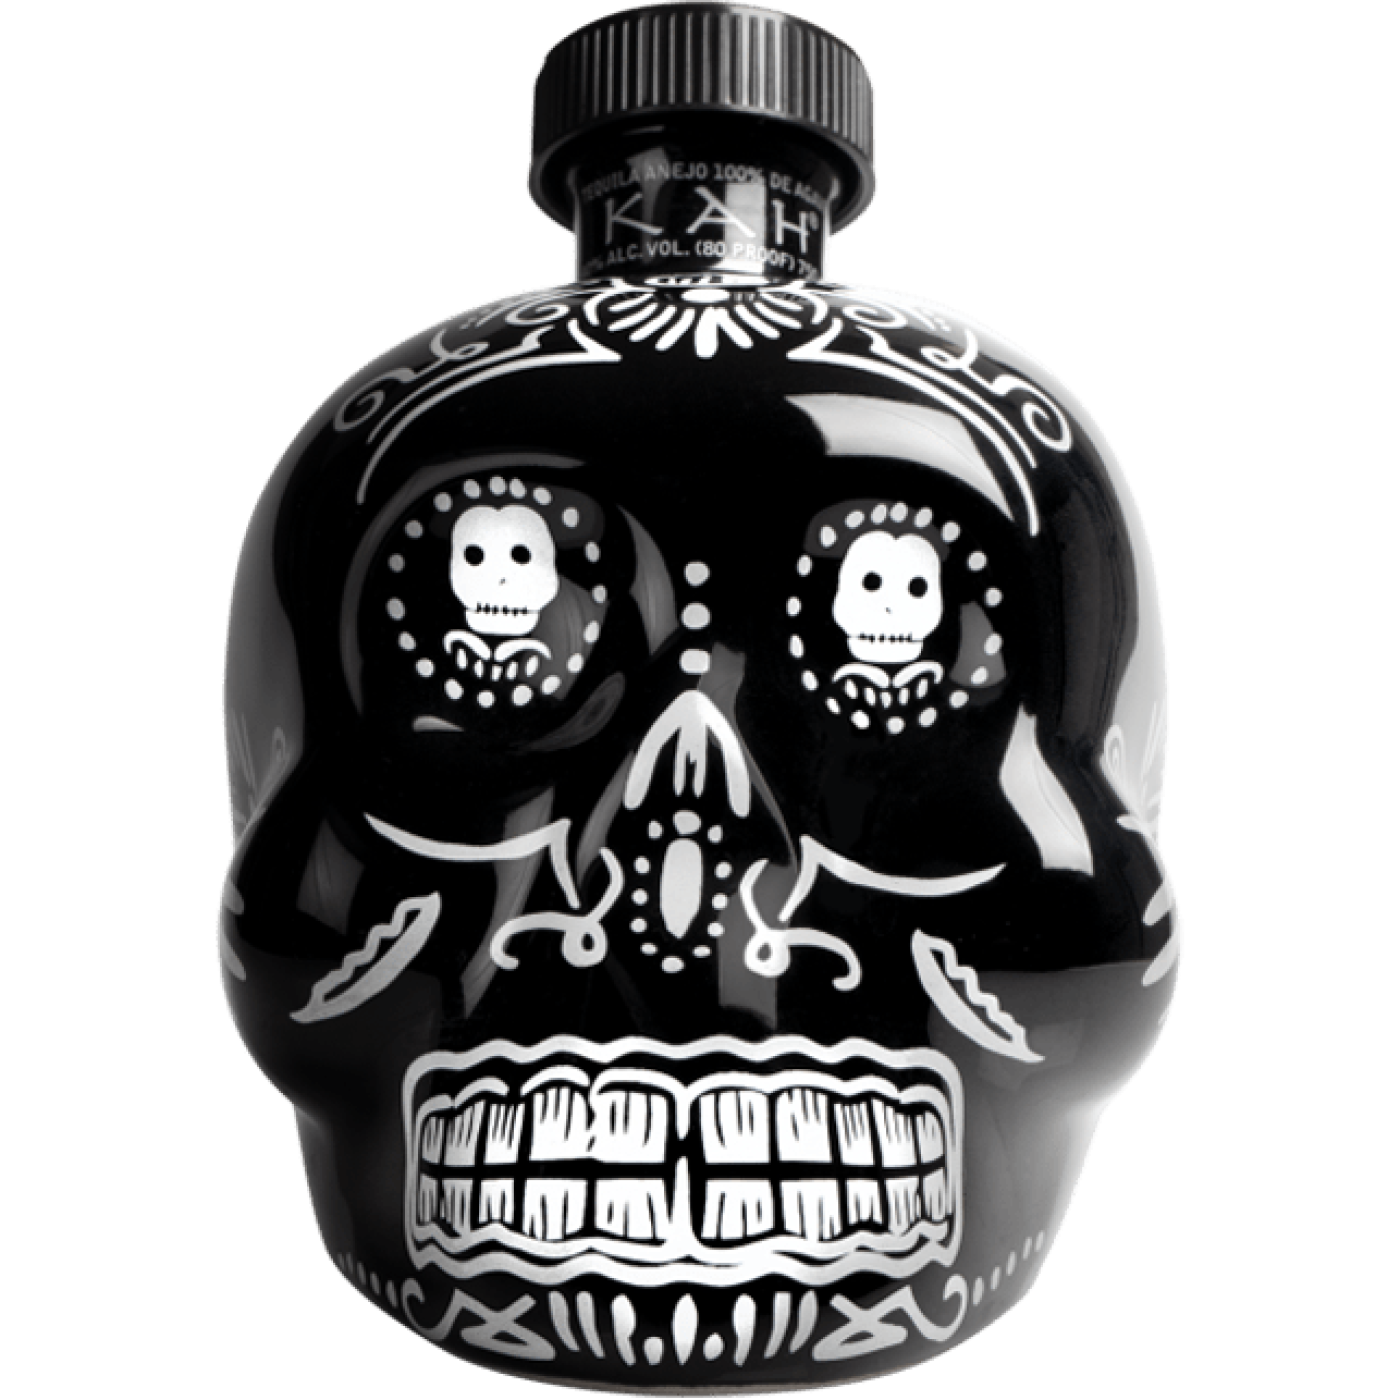 KAH ANEJO MEXICAN TEQUILA